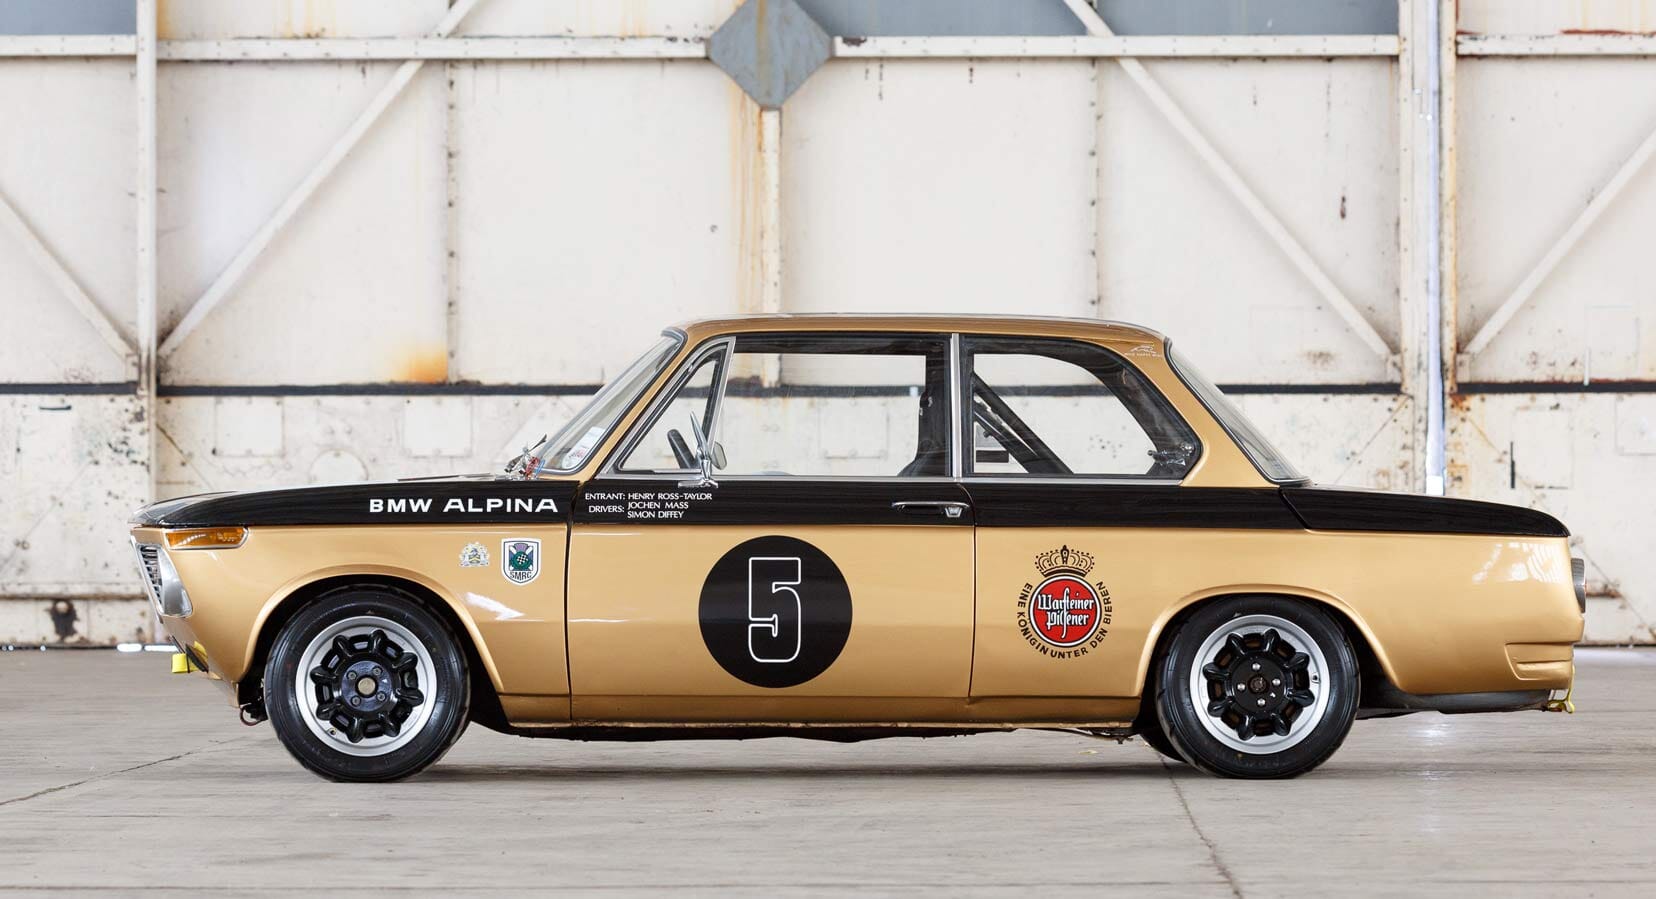 Classic Car Find of the Week: 1972 BMW 2002 Race Car